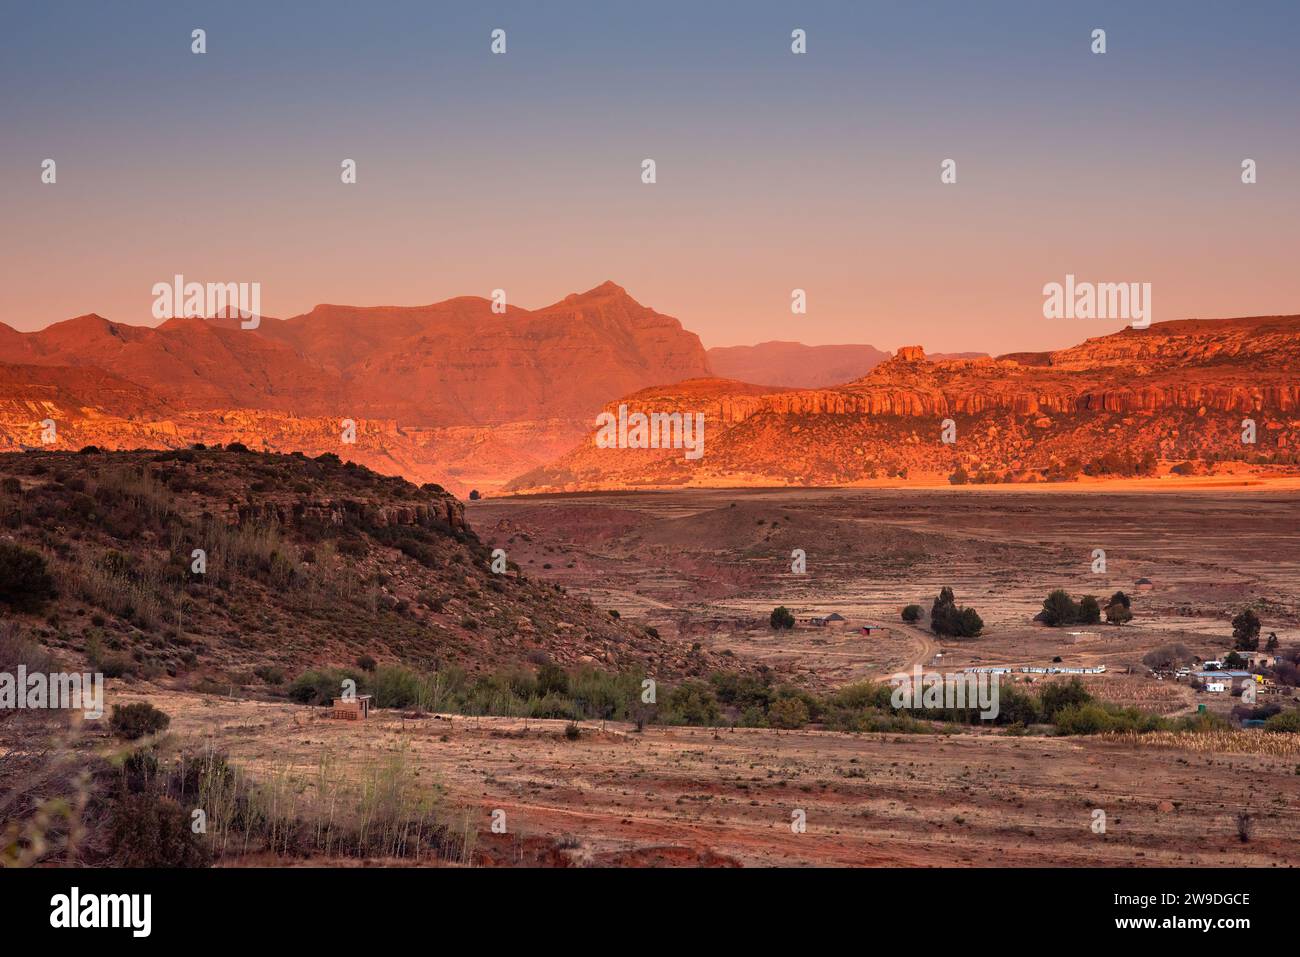 A few scattered huts and buildings against the backdrop of mountains in Lesotho, Africa Stock Photo